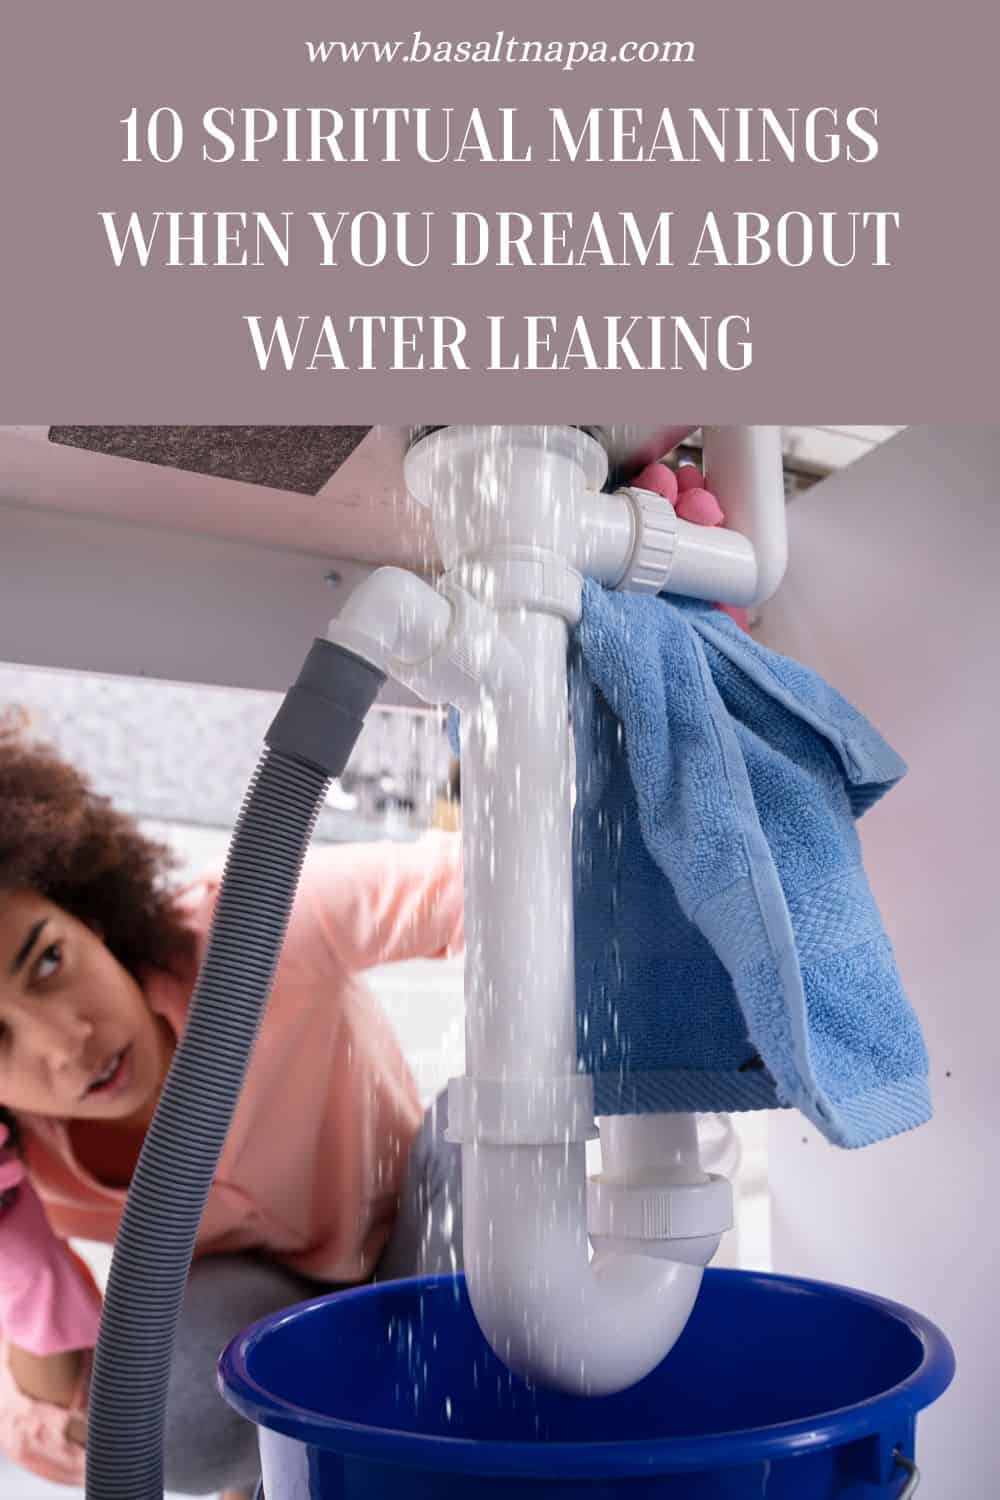 What Does It Mean When You Dream About Water Leaking?